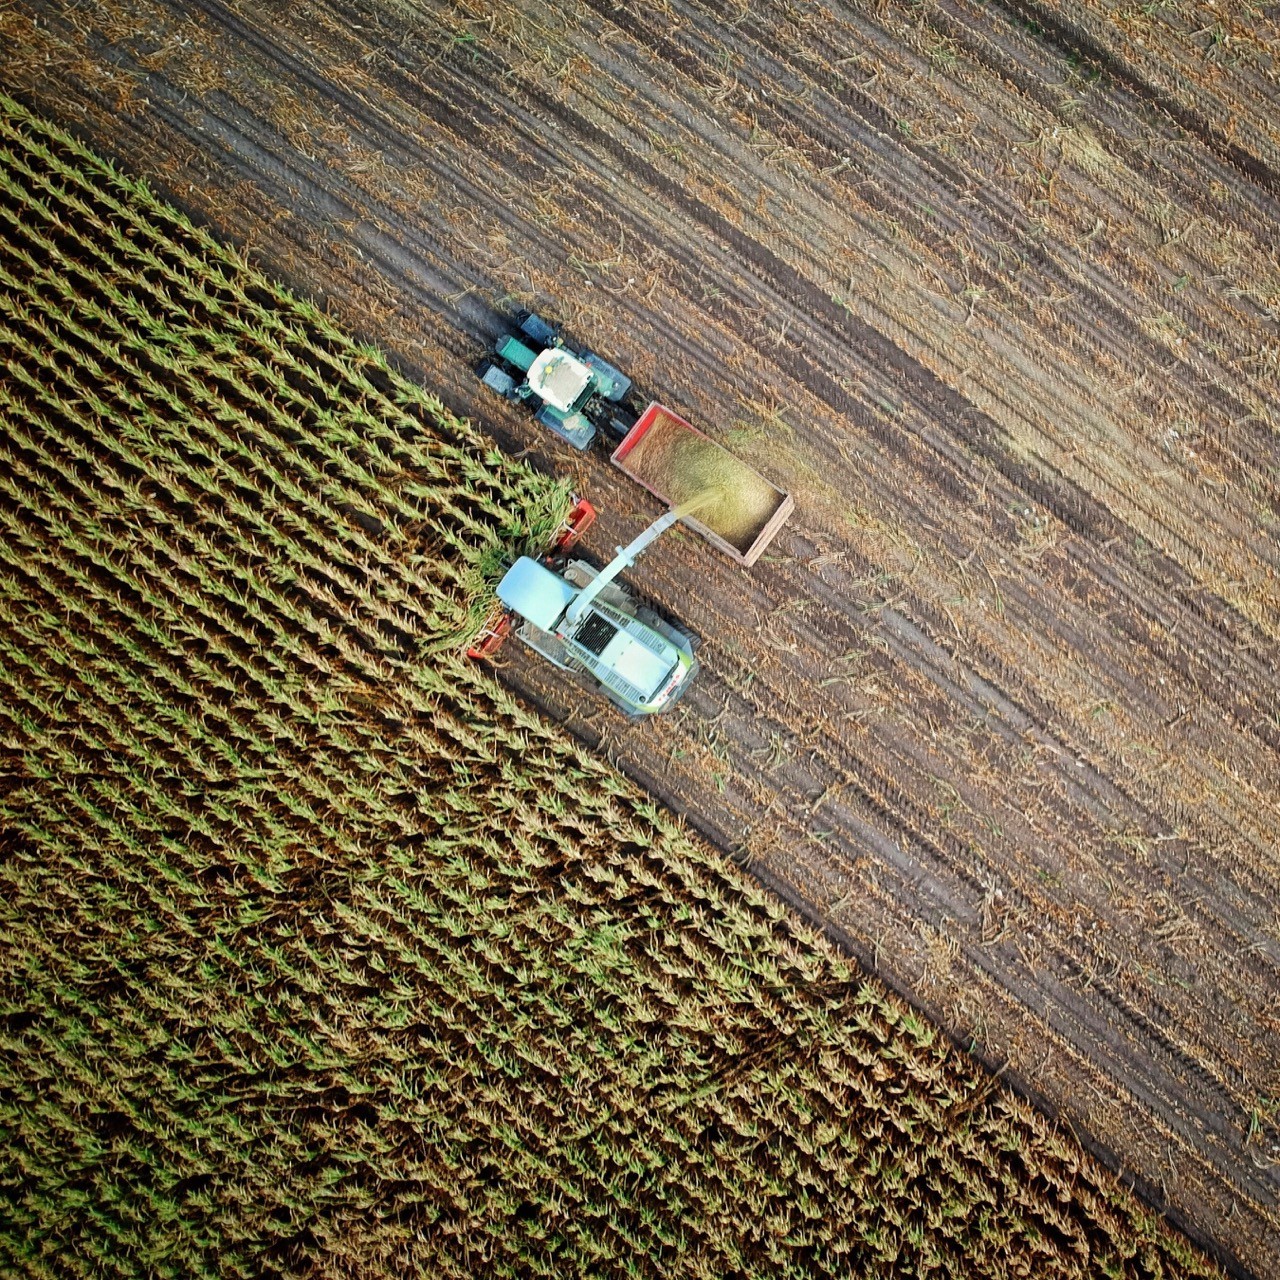 tractor harvesting crops in a field